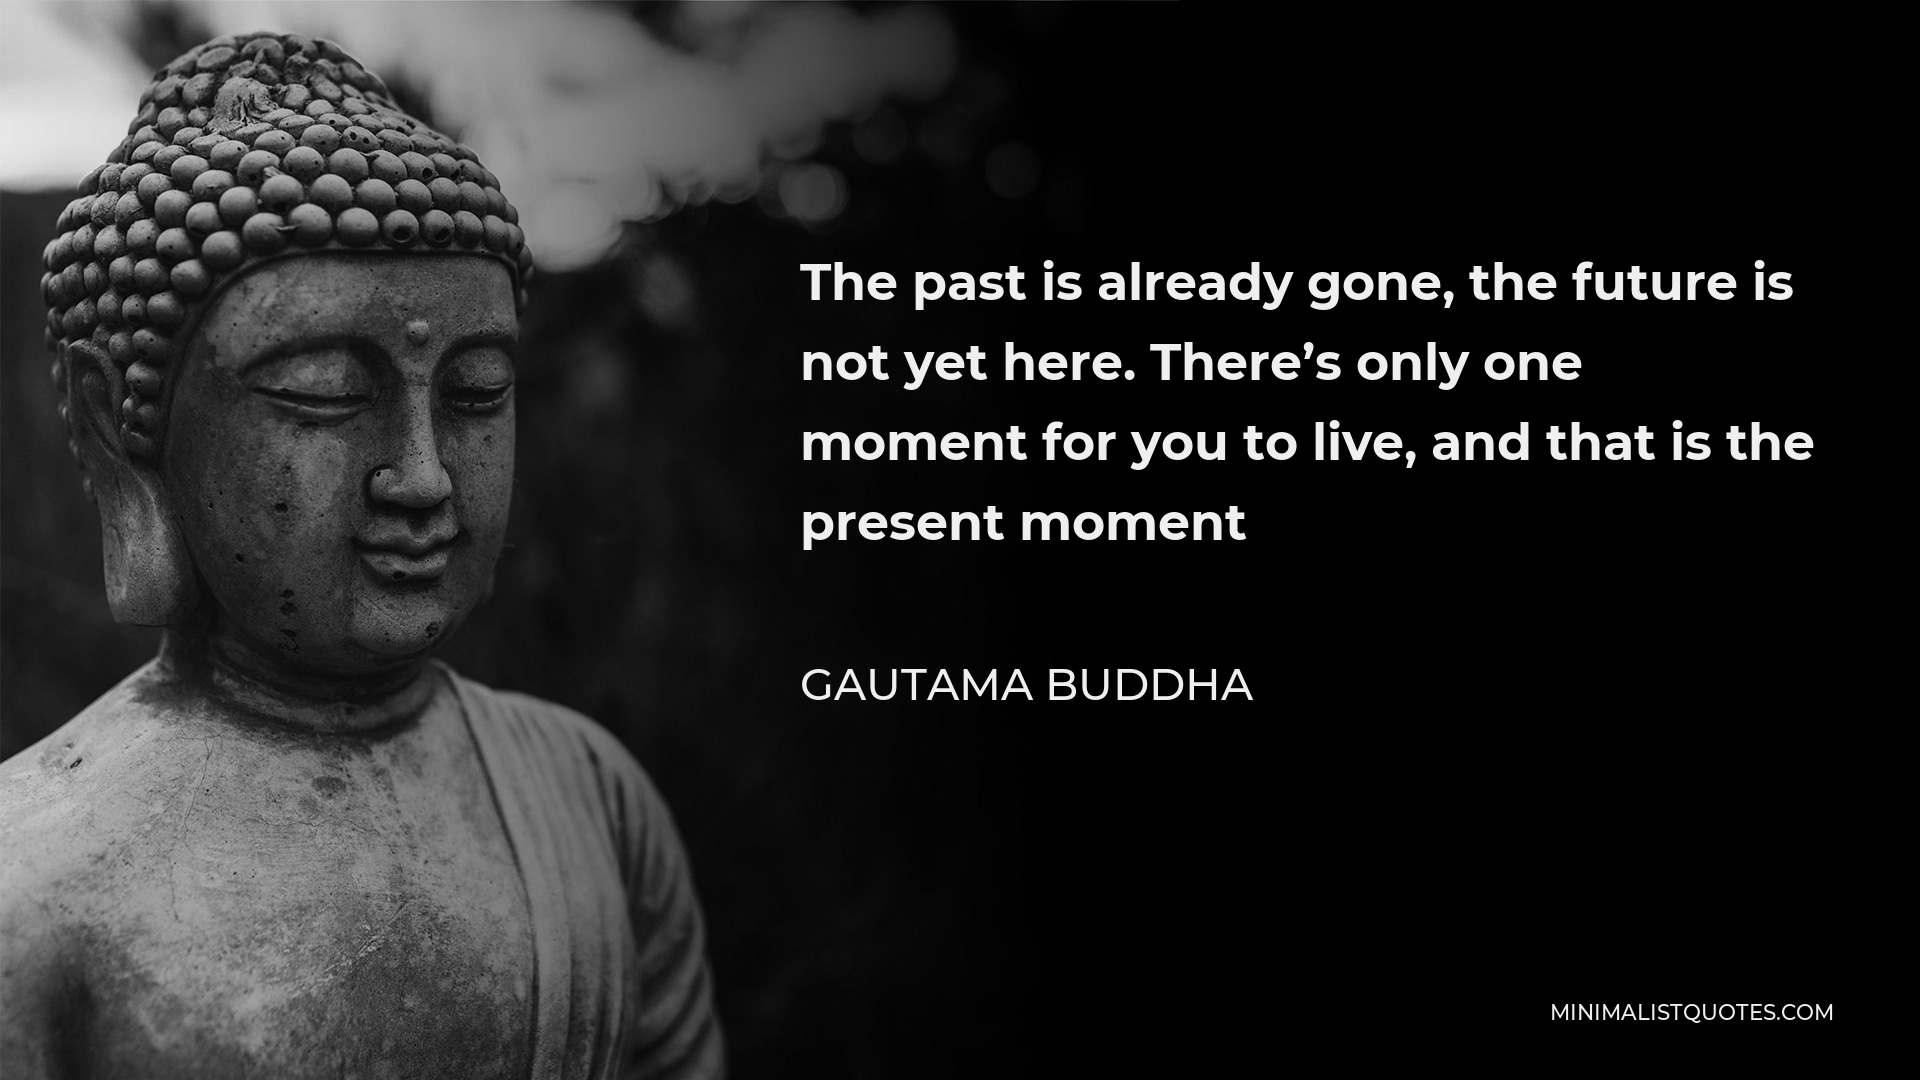 Gautama Buddha Quote - The past is already gone, the future is not yet here. There’s only one moment for you to live, and that is the present moment